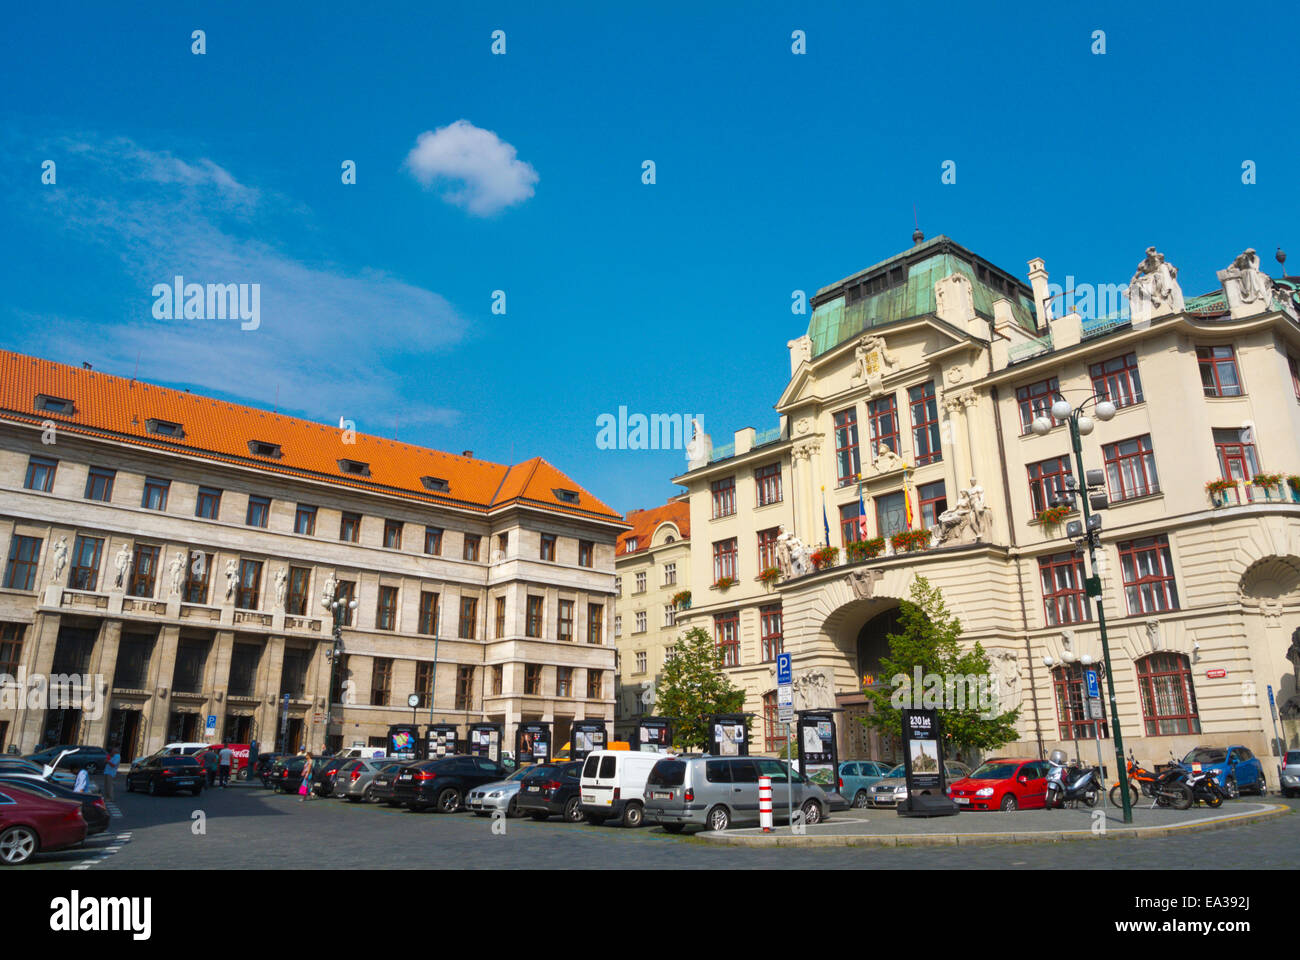 Marianske namesti, with town hall and main library, old town, Prague, Czech Republic, Europe Stock Photo